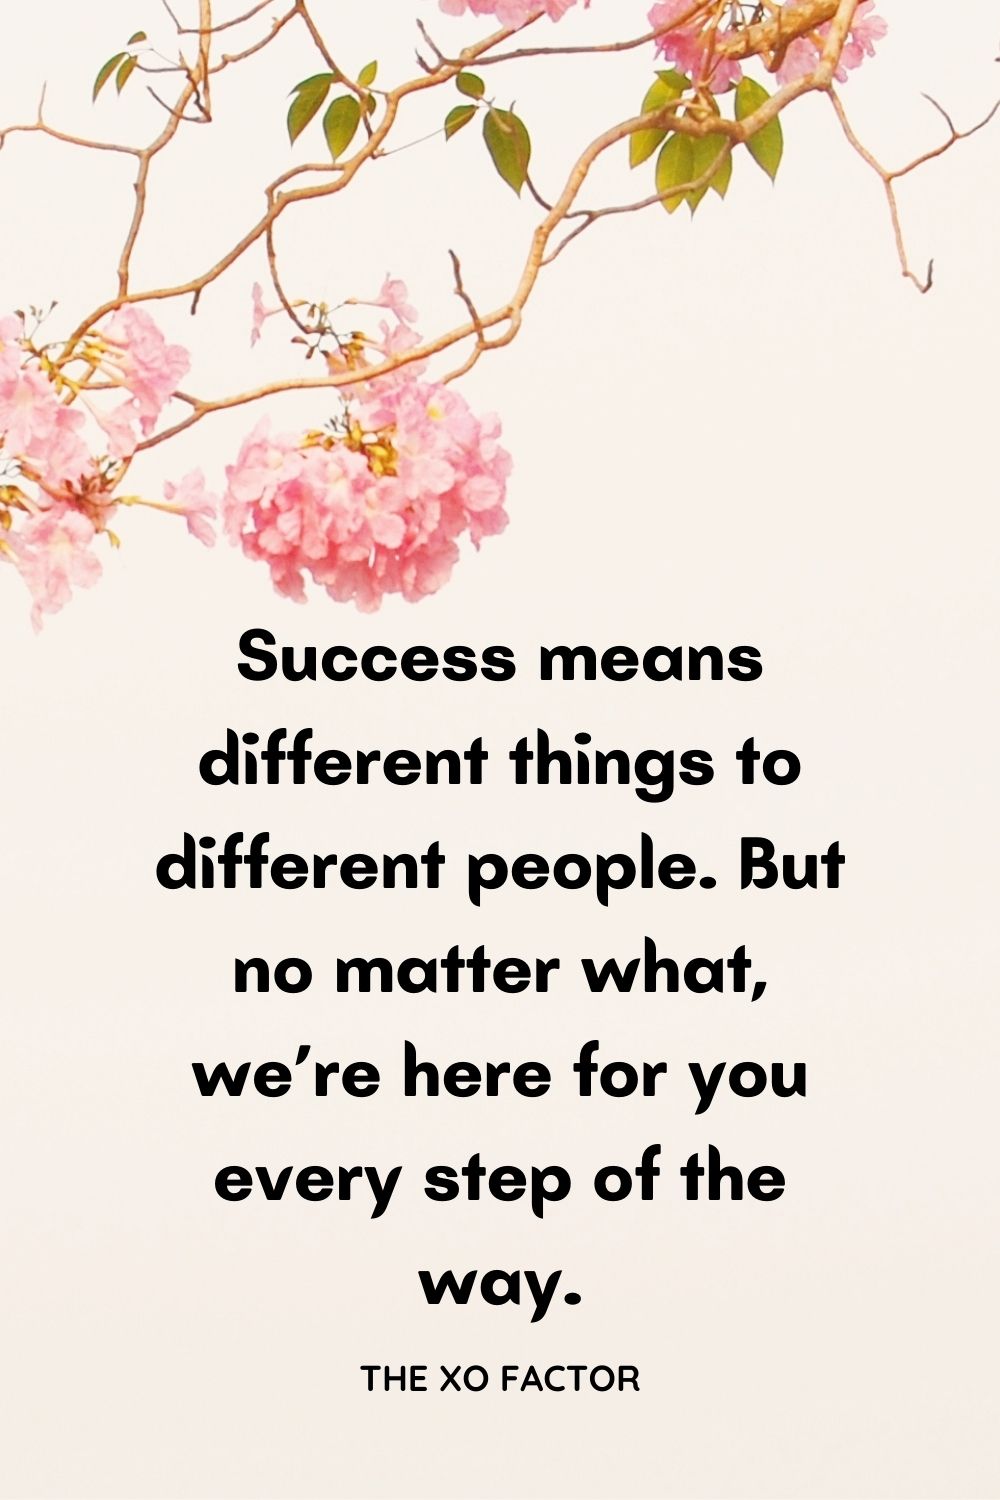 Success means different things to different people. But no matter what, we’re here for you every step of the way.